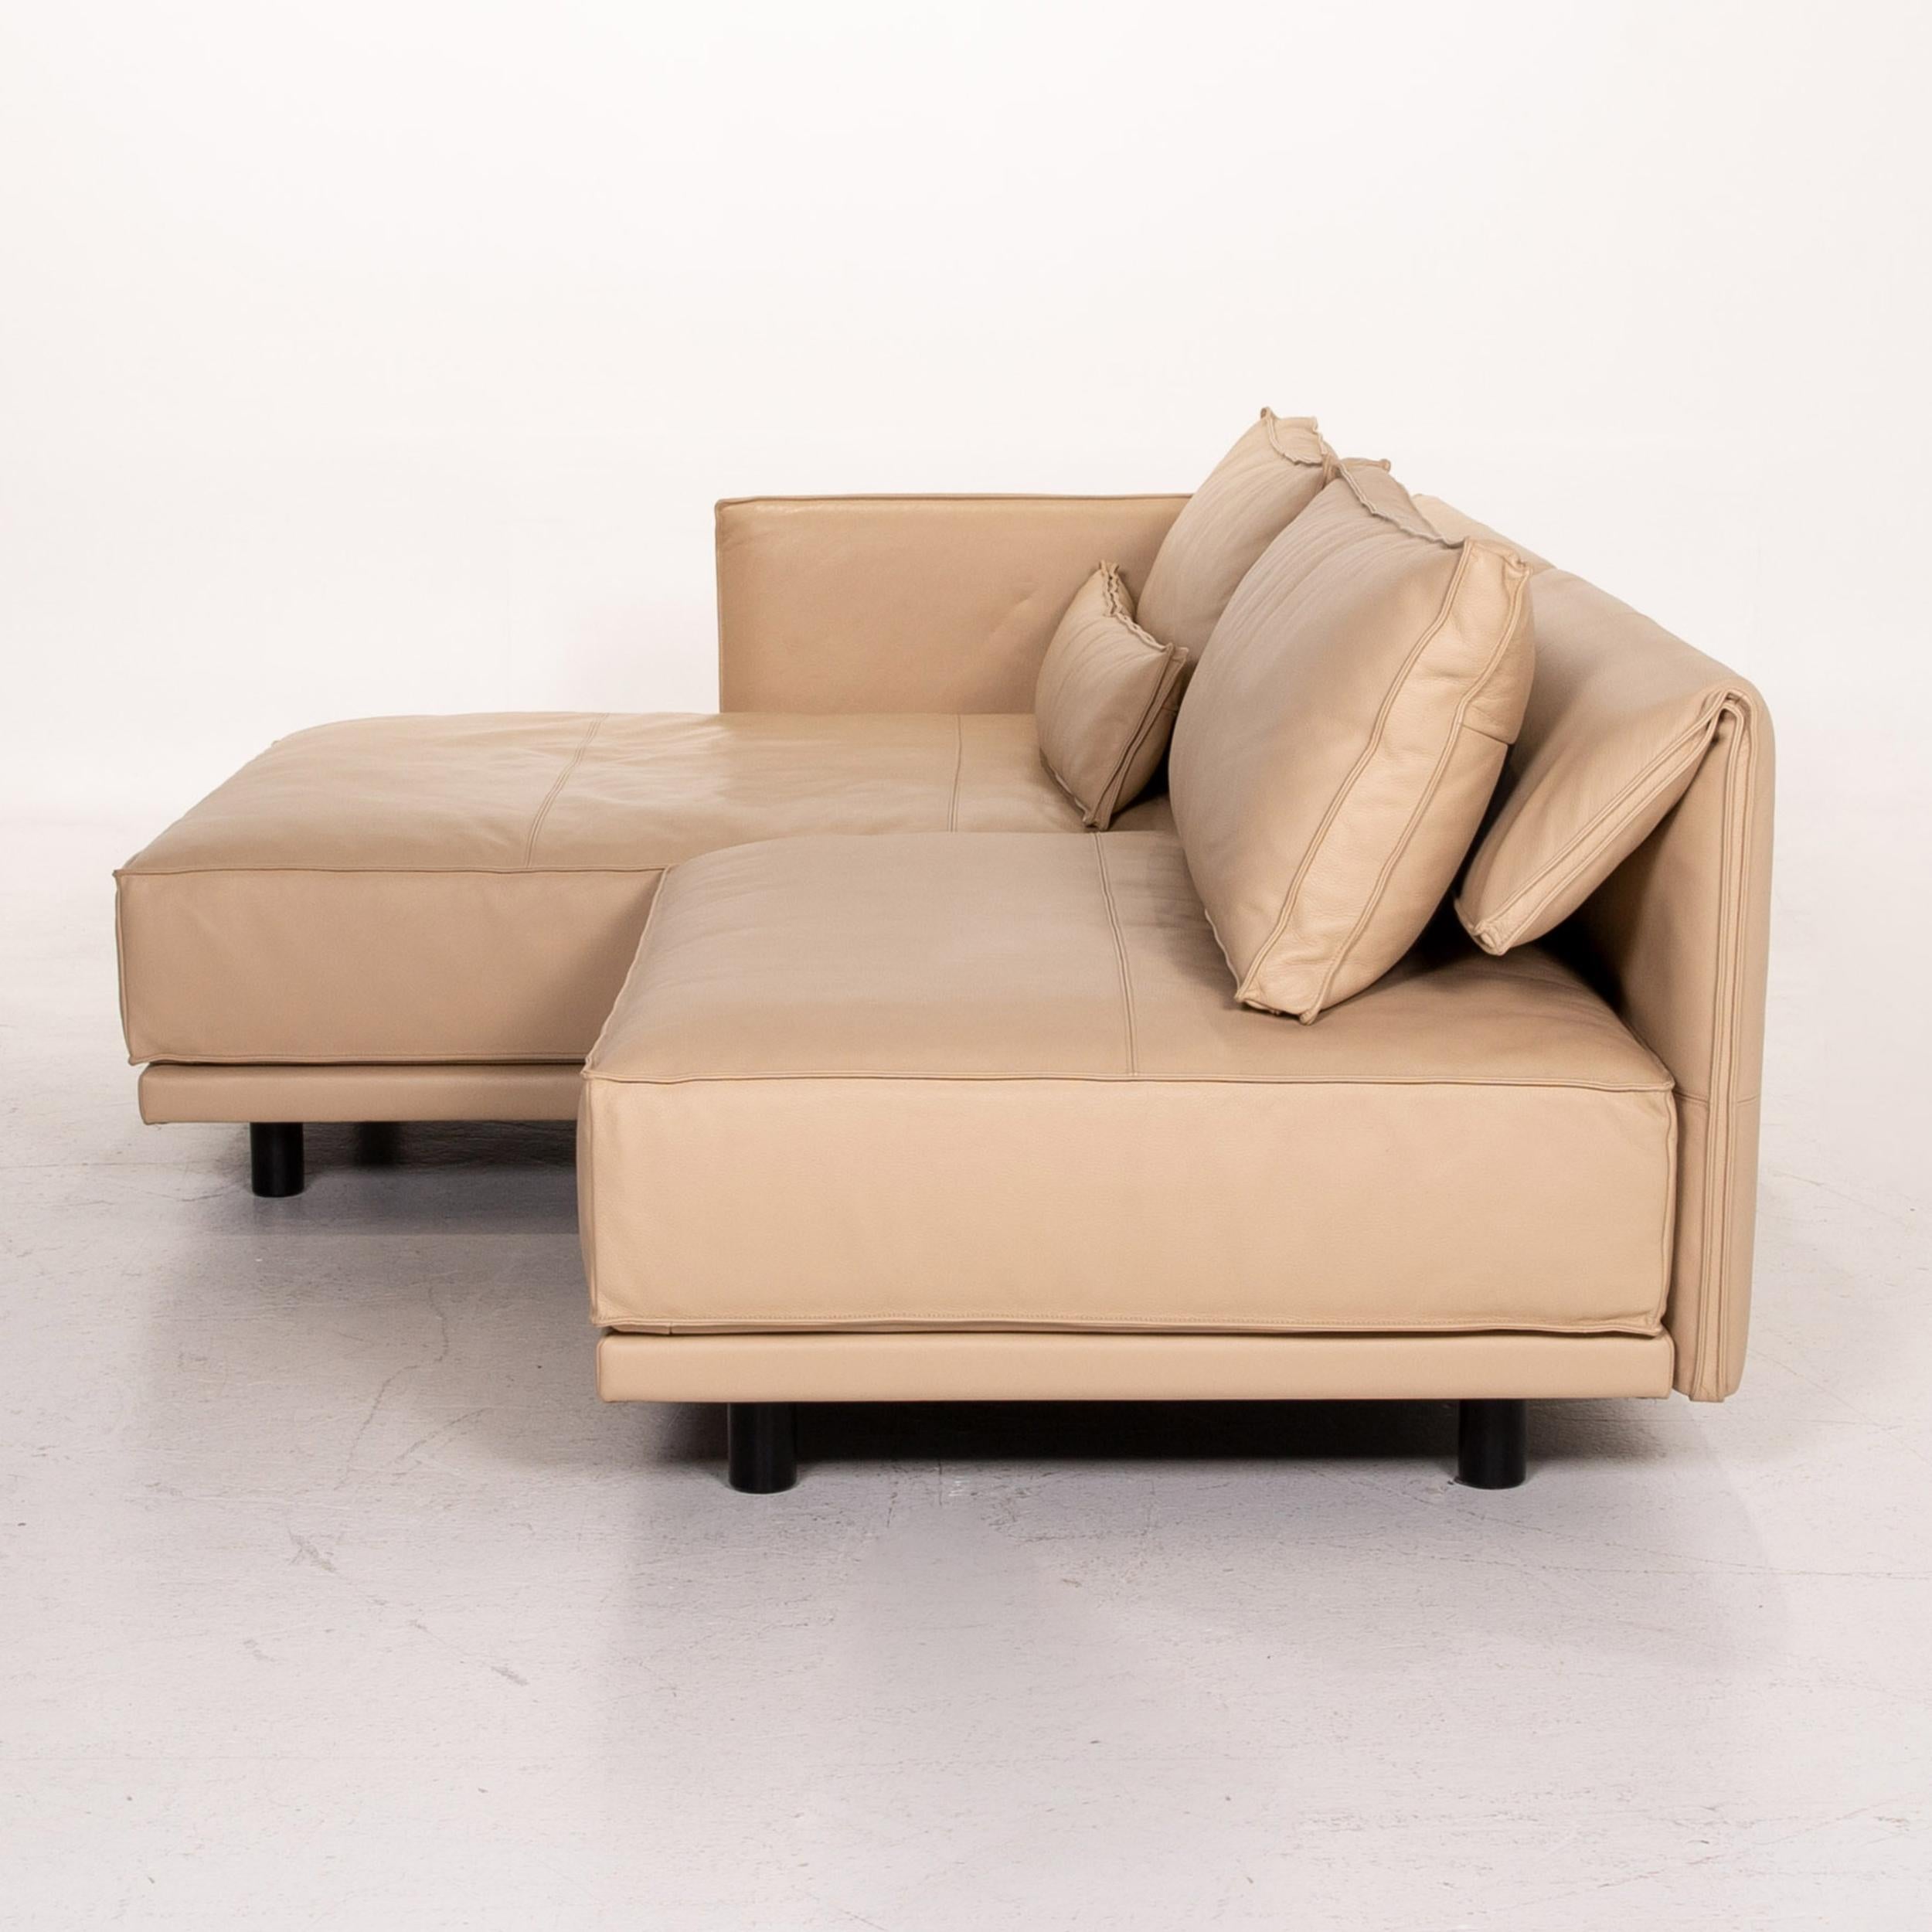 IP Design Cube Lounge Leather Corner Sofa Beige Sofa Couch For Sale 4